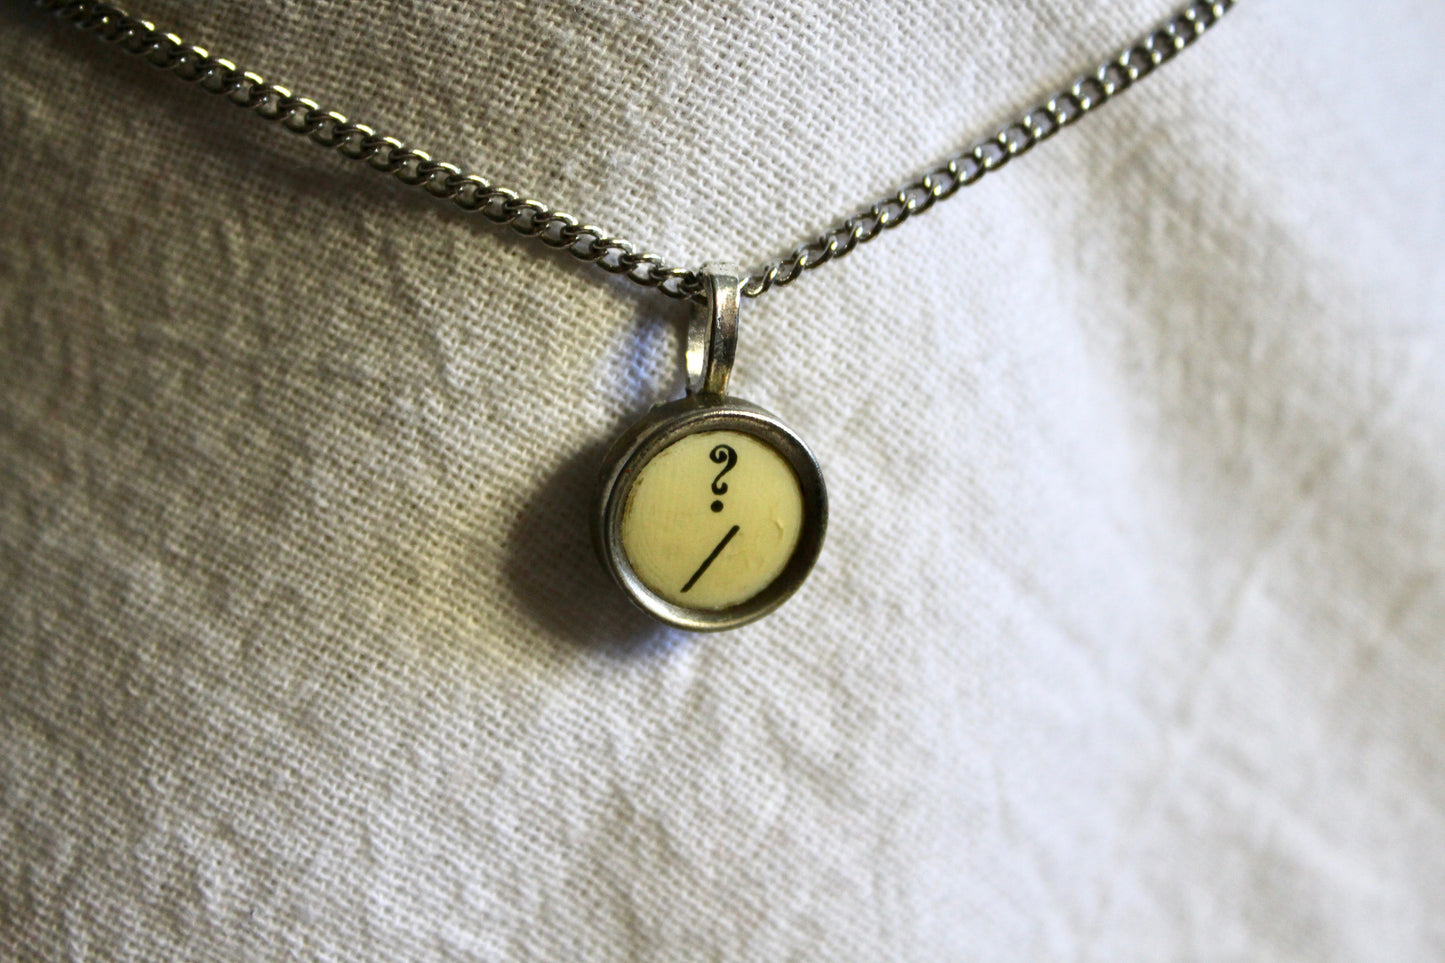 Typewriter Key Necklace Question ?